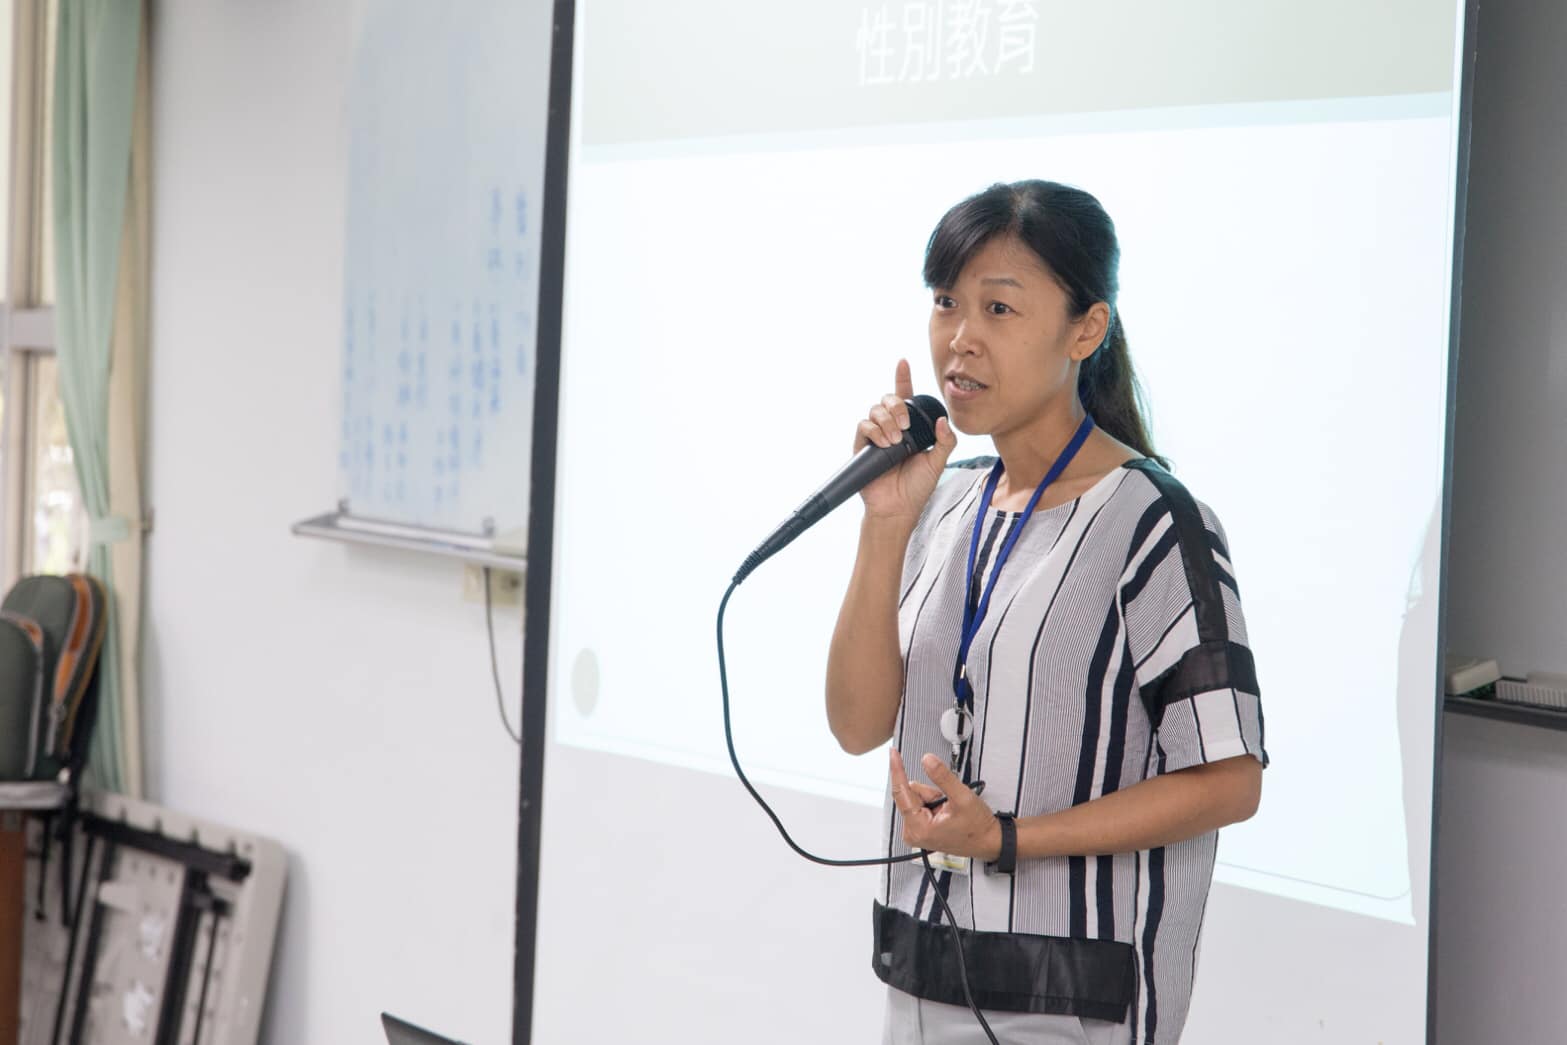 Teacher Tsui gives lectures about sexual harassment